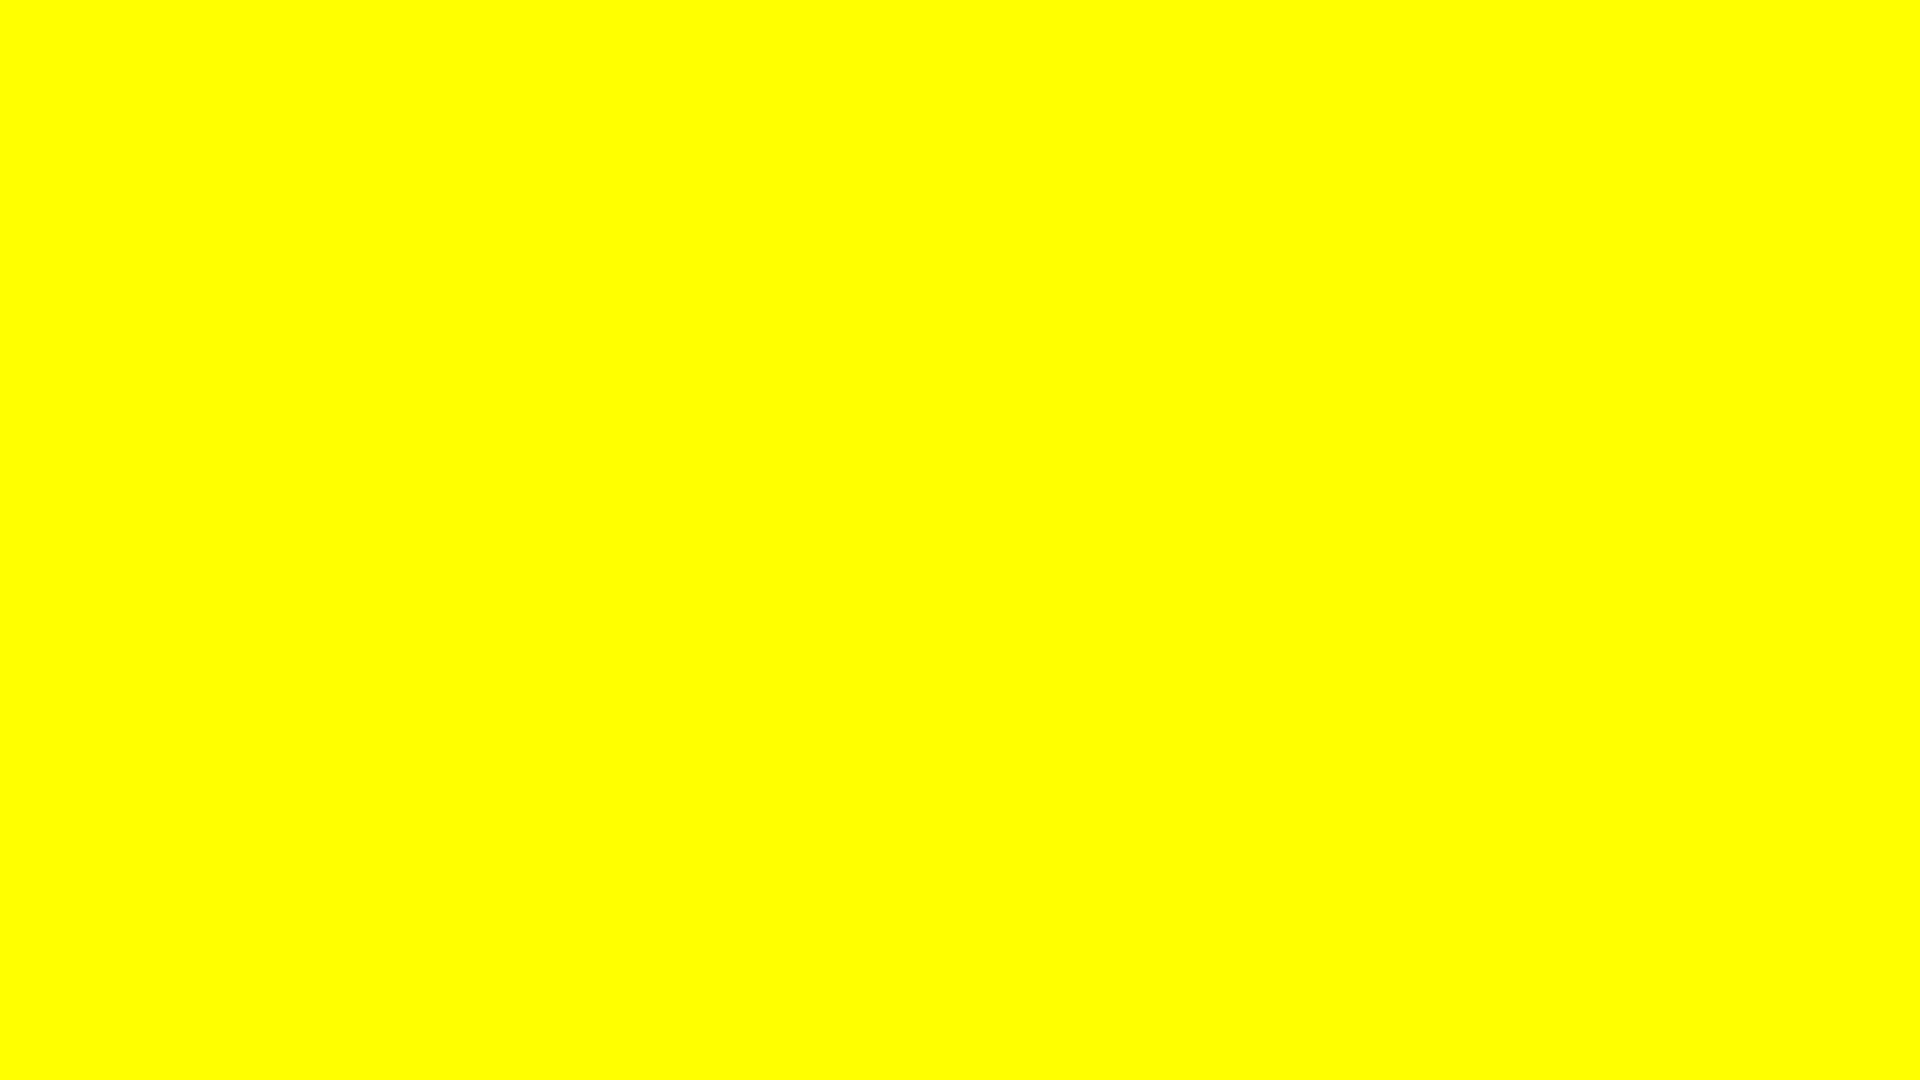 Solid Light Yellow Background Galleryhip The